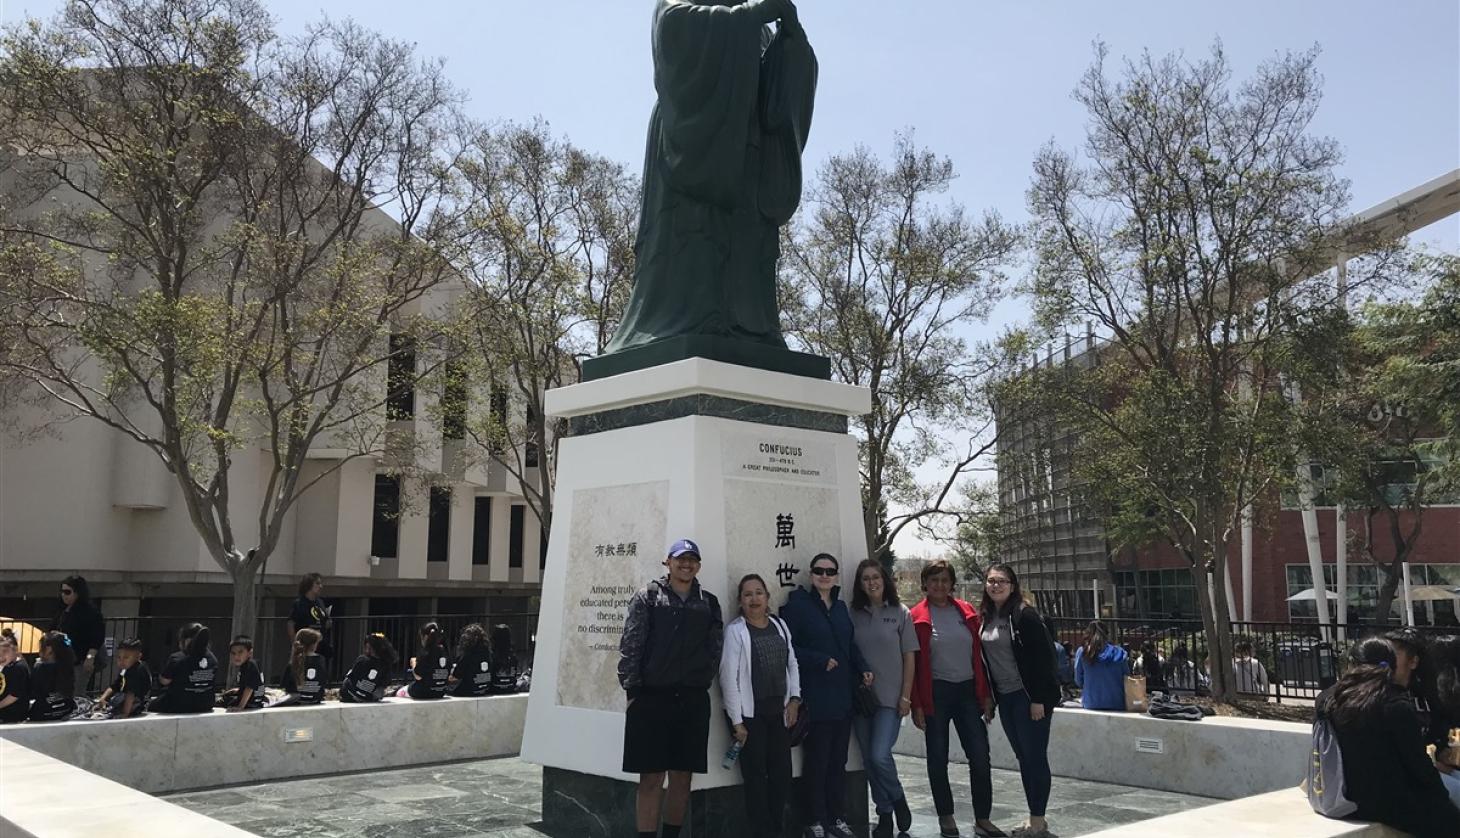 Students in Front of a Statue